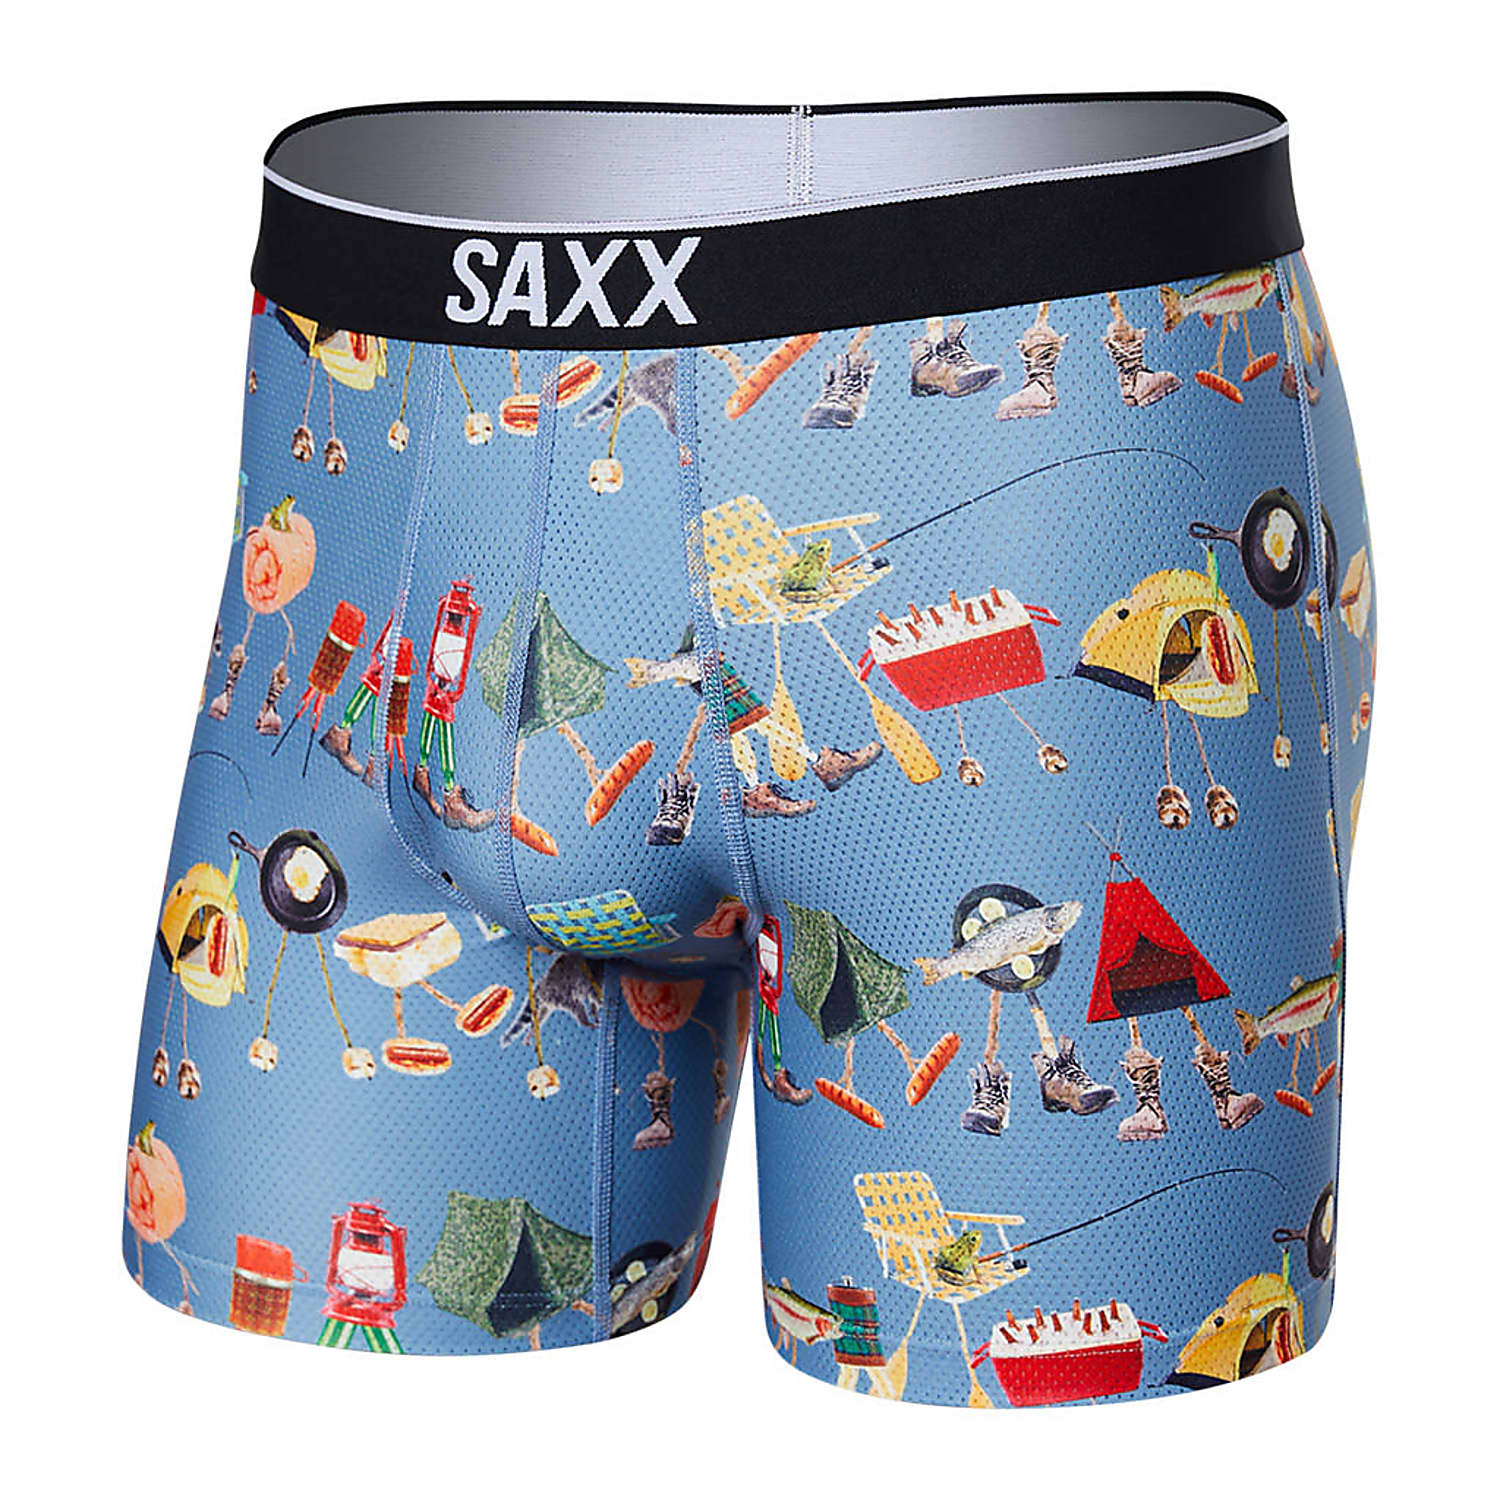 Buy Saxx M VOLT BOXER BRIEF, Take A Hike - Blue online now - www